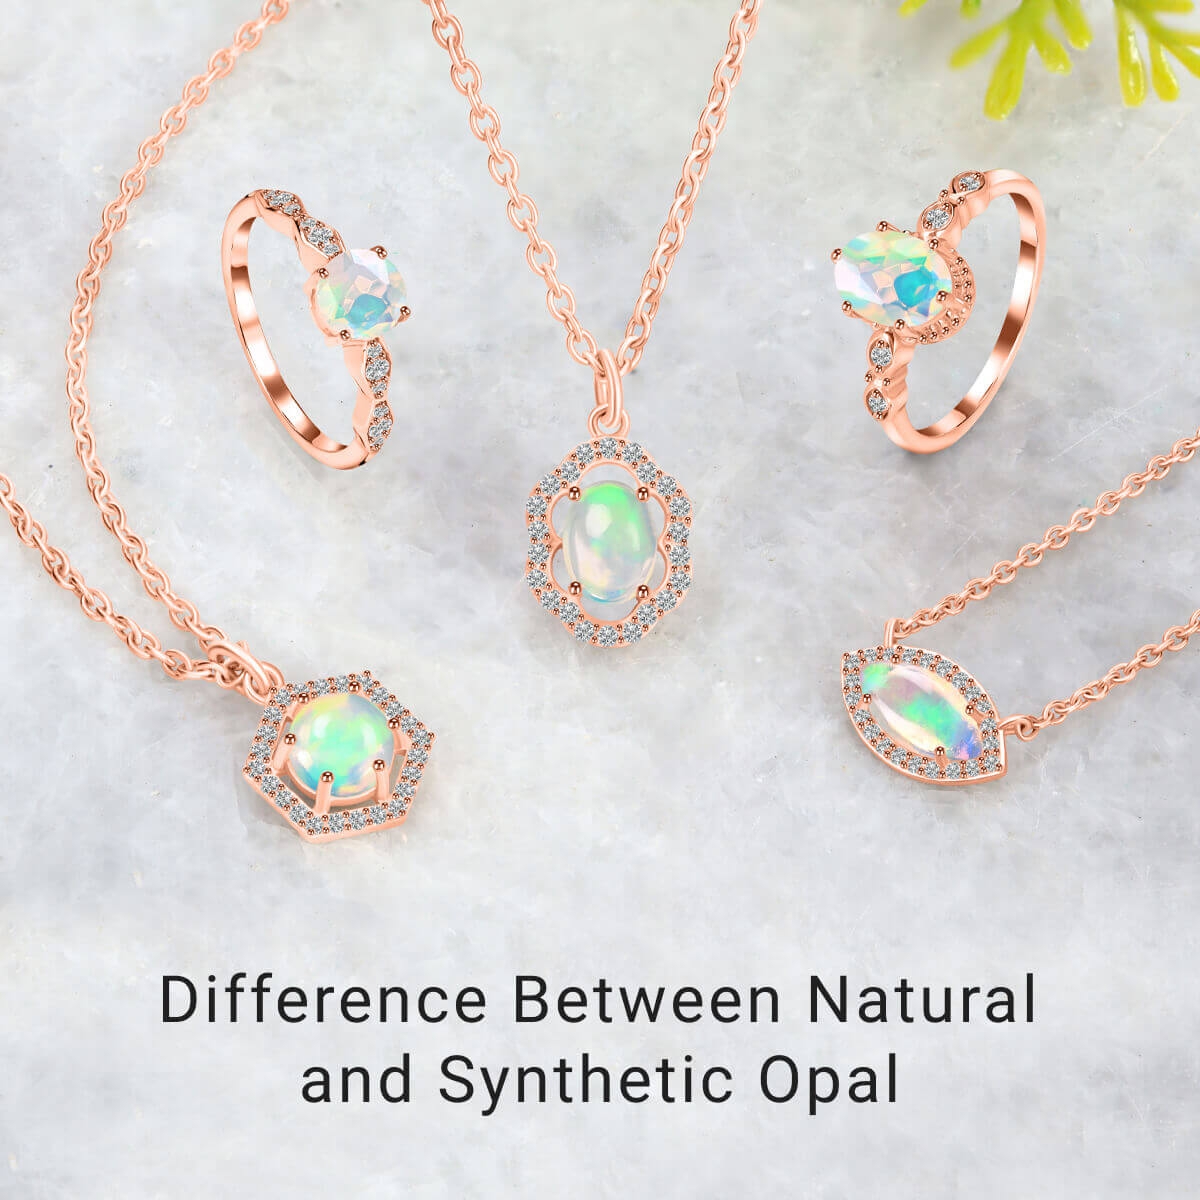 How to differentiate between natural opal and synthetic opal